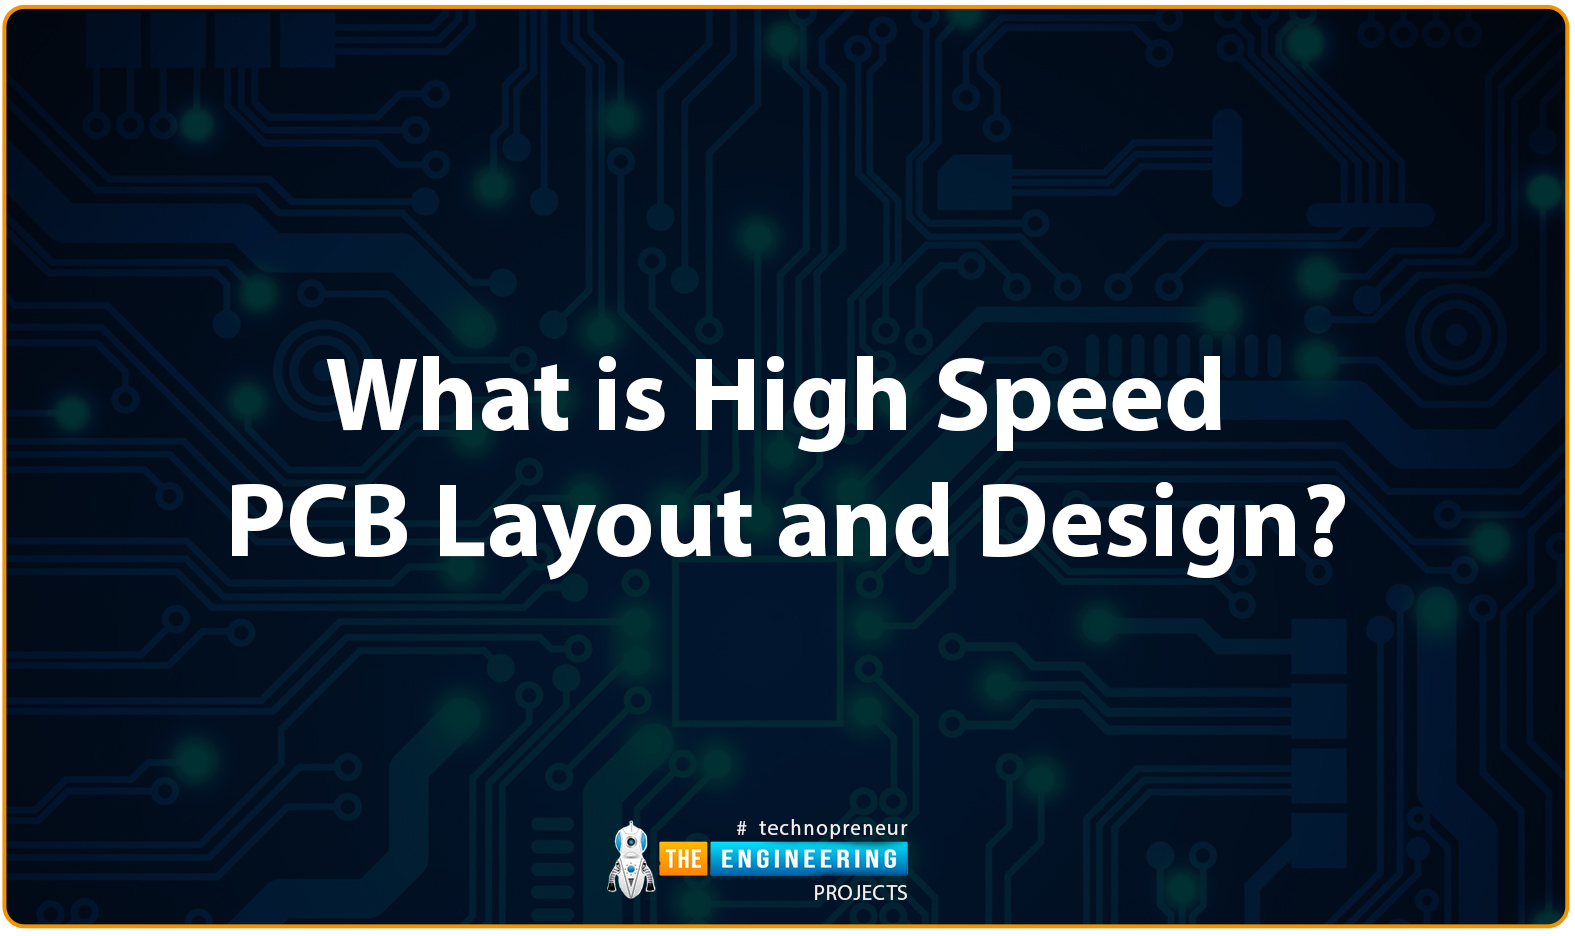 INTRODUCTION TO HIGH SPEED PCB DESIGN, What is high speed PCB design, Brief on signal and signal integrity, Digital signals, Analog signals, How to determine if the project is high speed, High speed PCB design Big Three Problems, Integrity, Noise, Timing, Correcting the Big Three Problems, Matching, Spacing, Impedance, Design rules and challenges for high speed design, Tuning of the trace length, Shape of the truck, The impedance, Location of the components, Termination, Grounding, Tips for high speed PCB design, Start with a plan, Every detail of your board stackup for manufacturing documentation, Floor planning